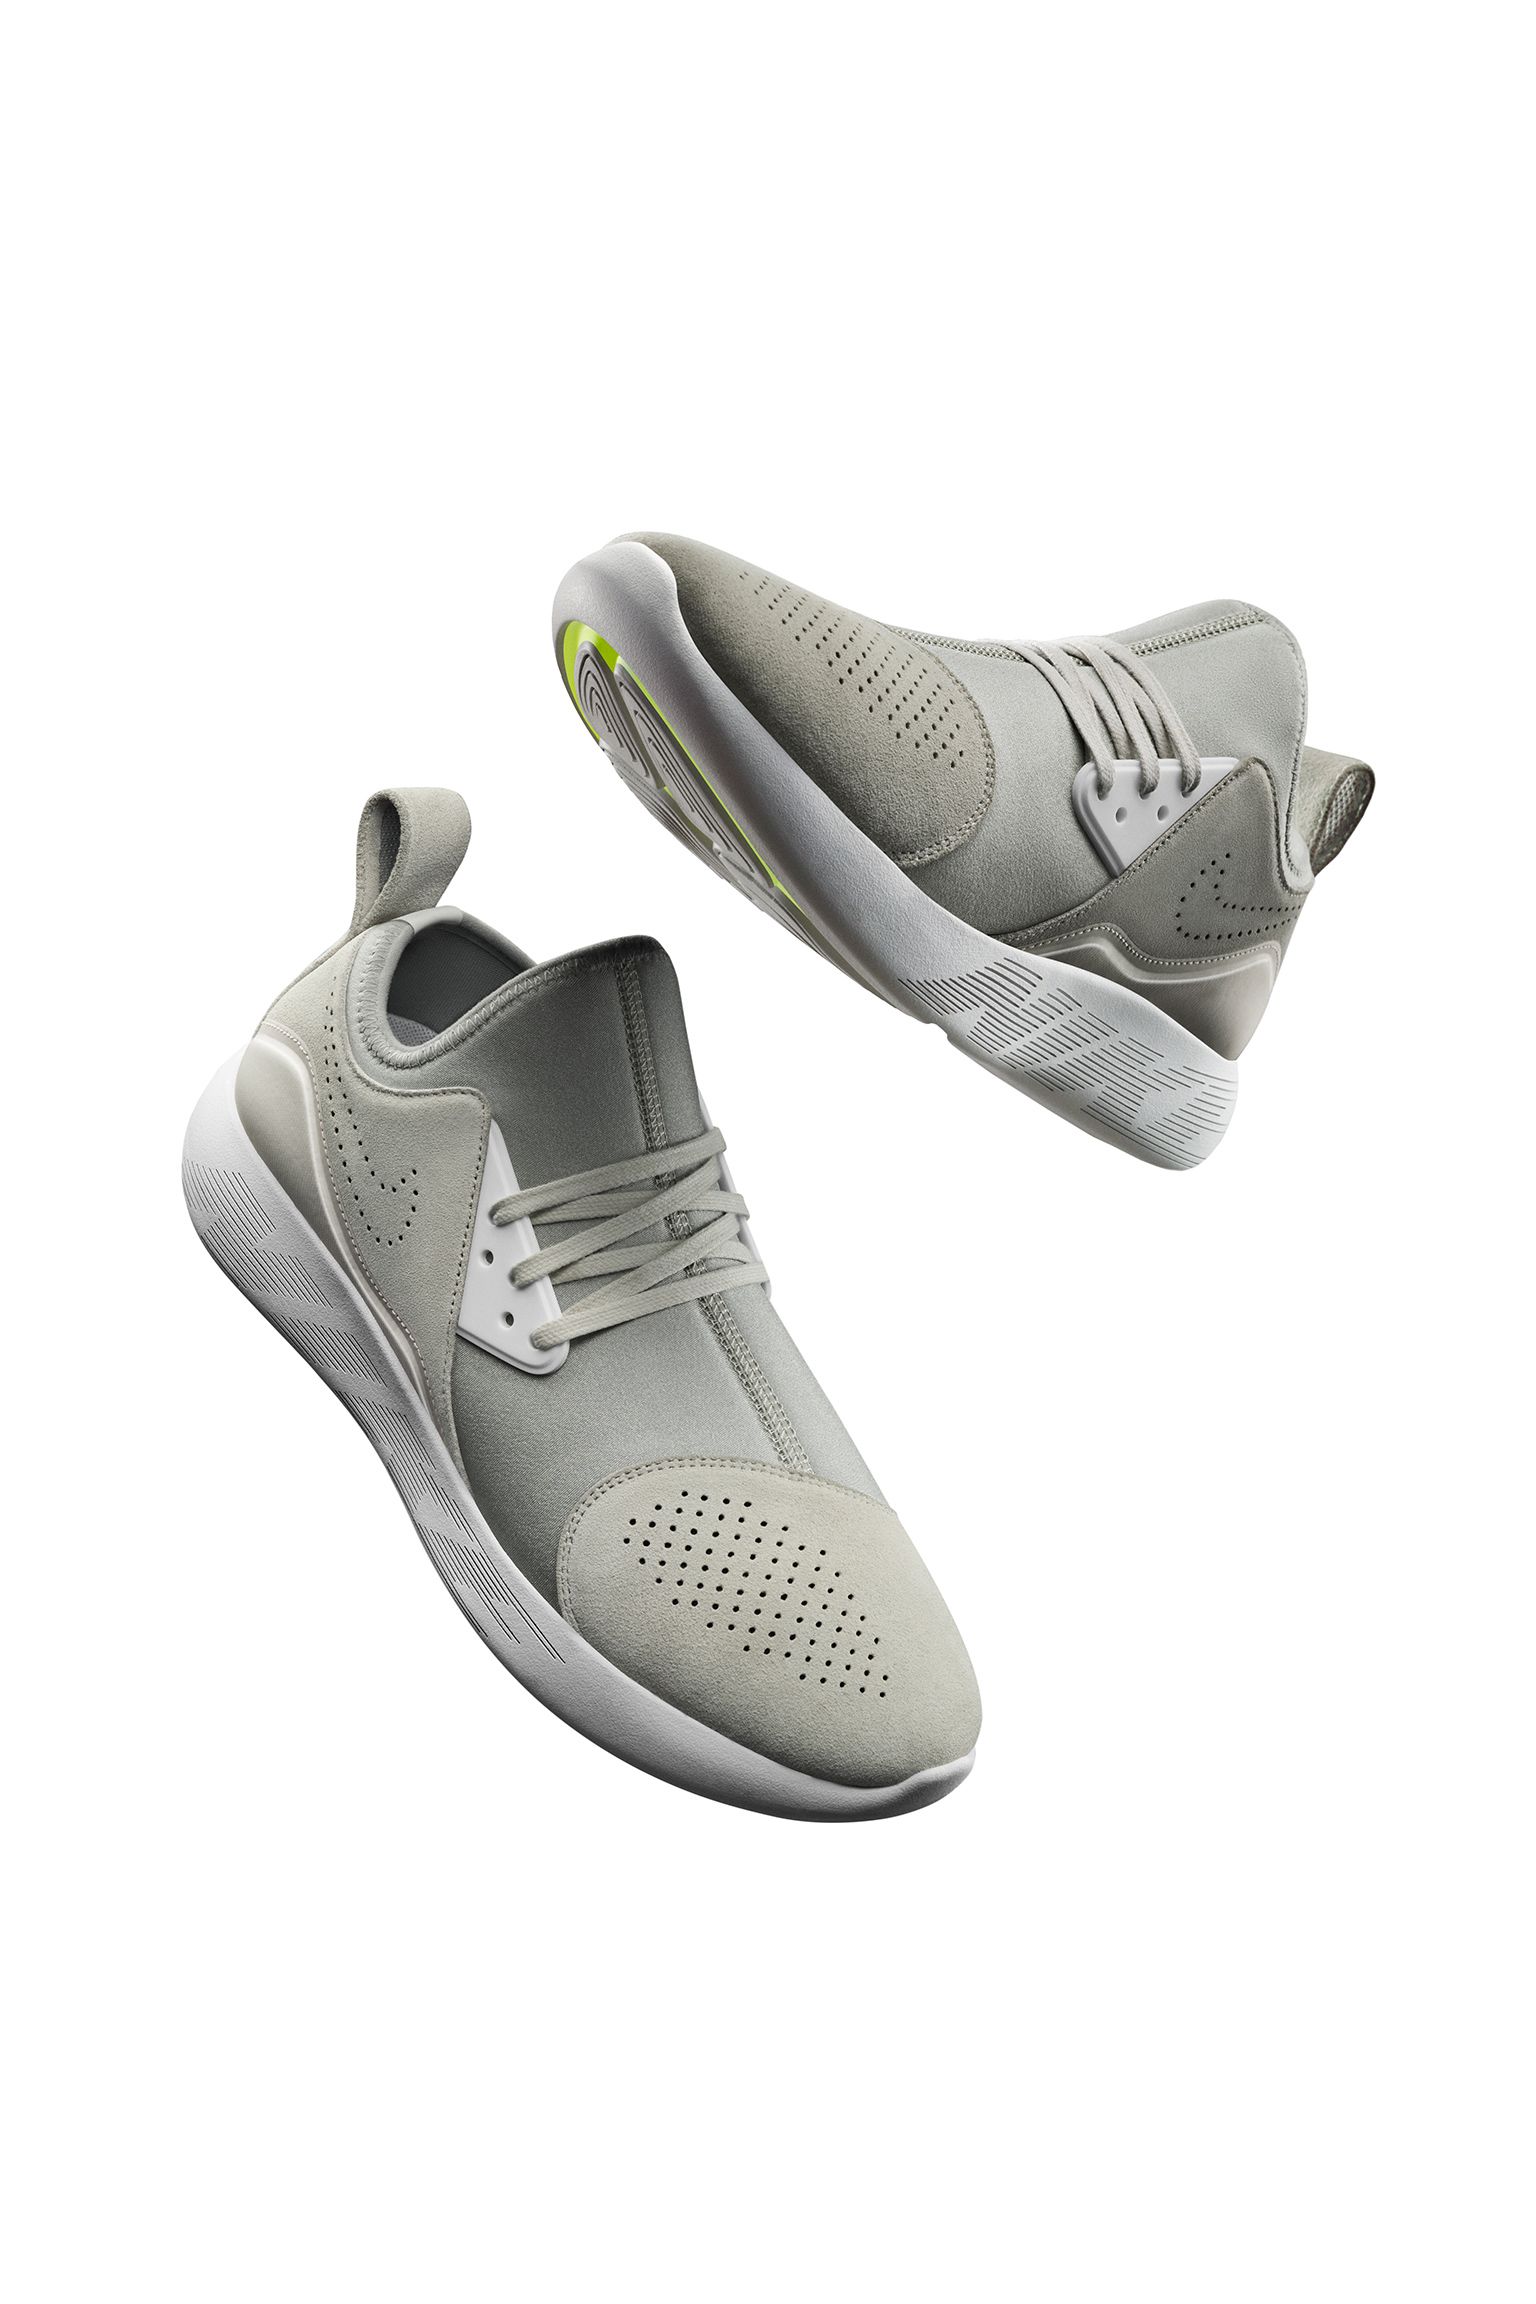 Nike LunarCharge Collection. Nike SNKRS